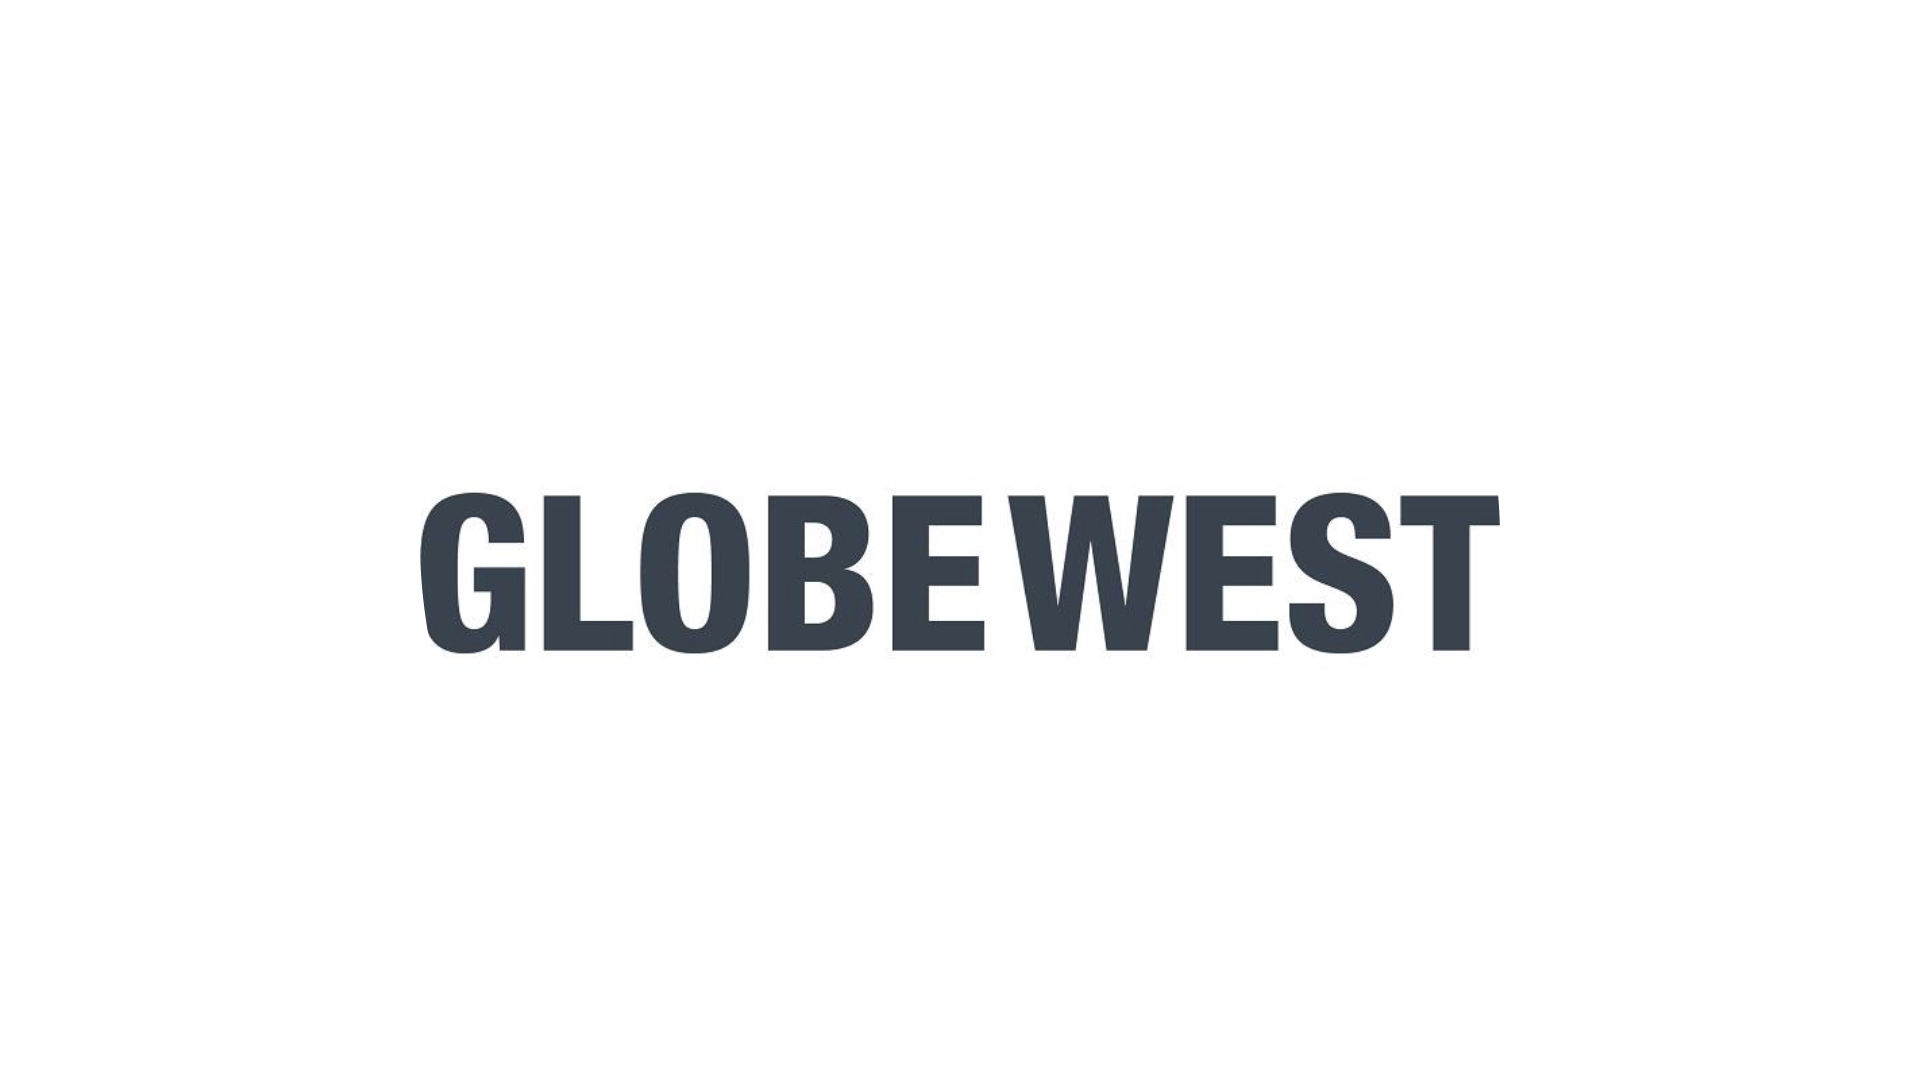 Get the Laid Back Luxe style by shopping with Globewest